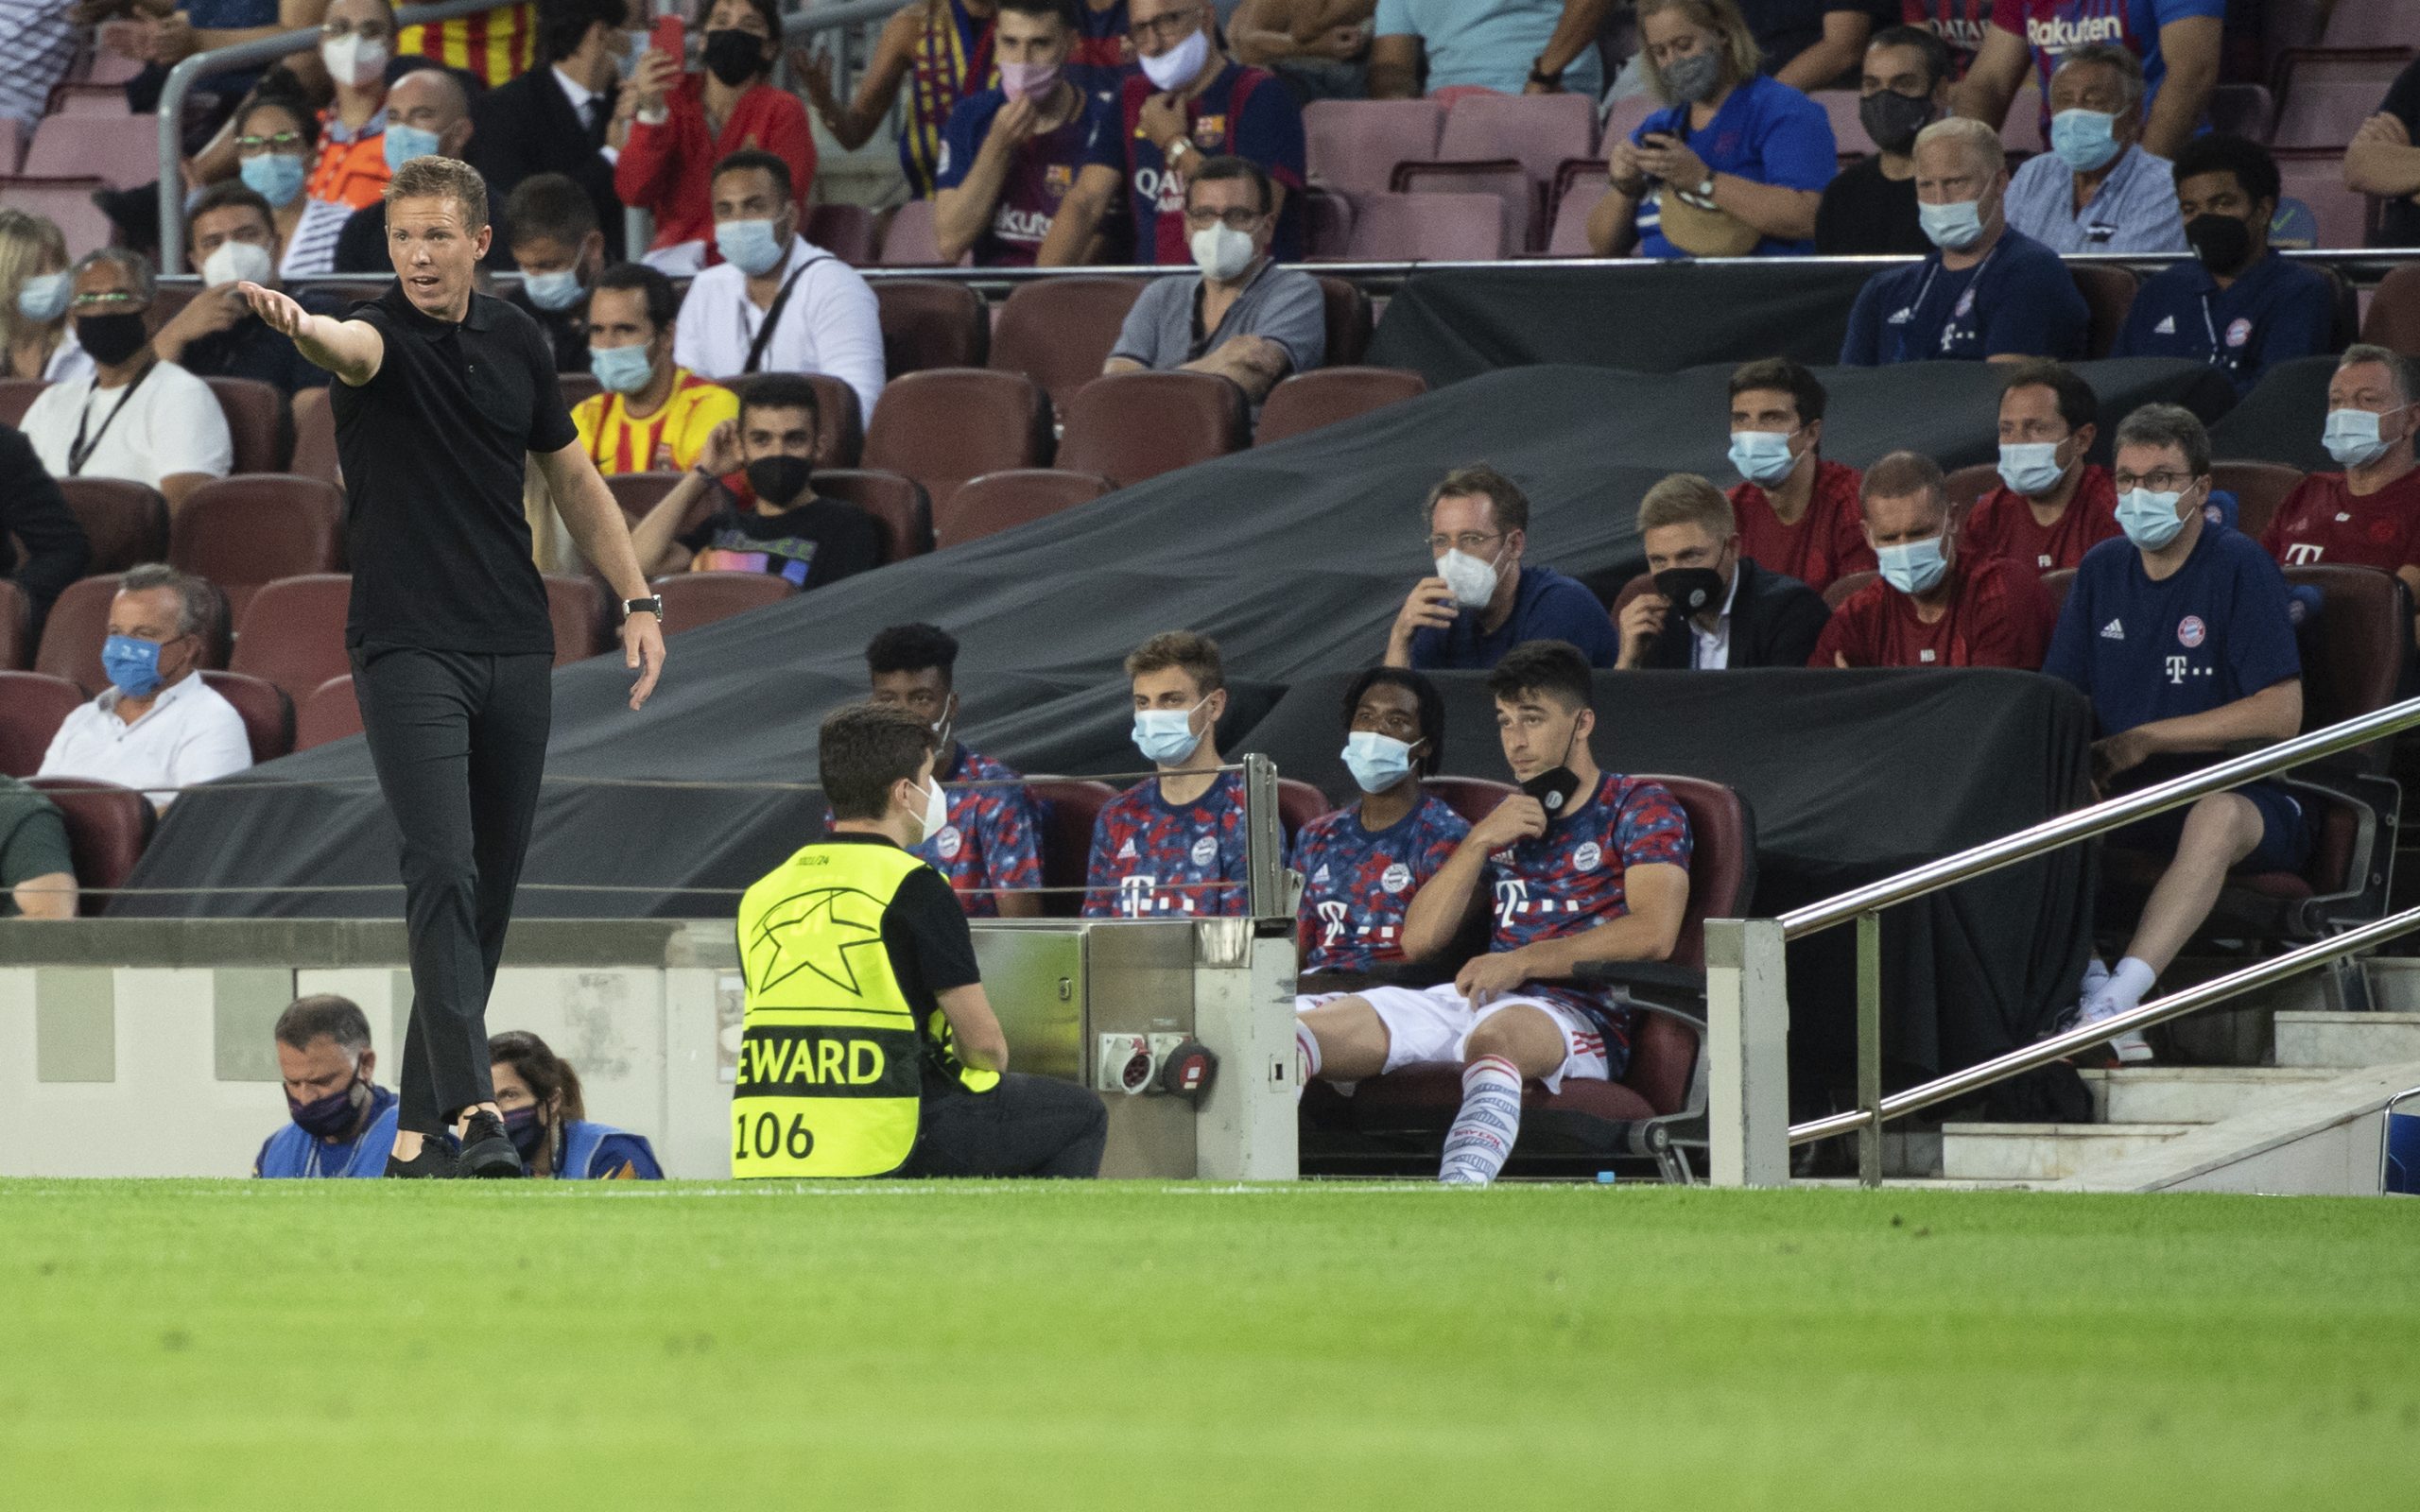 14 September 2021, Spain, Barcelona: Football: Champions League, FC Barcelona - Bayern Munich, Group Stage, Group E, Matchday 1, Camp Nou. Coach Julian Nagelsmann from Munich follows the match from the sidelines. Photo by: Sven Hoppe/picture-alliance/dpa/AP Images